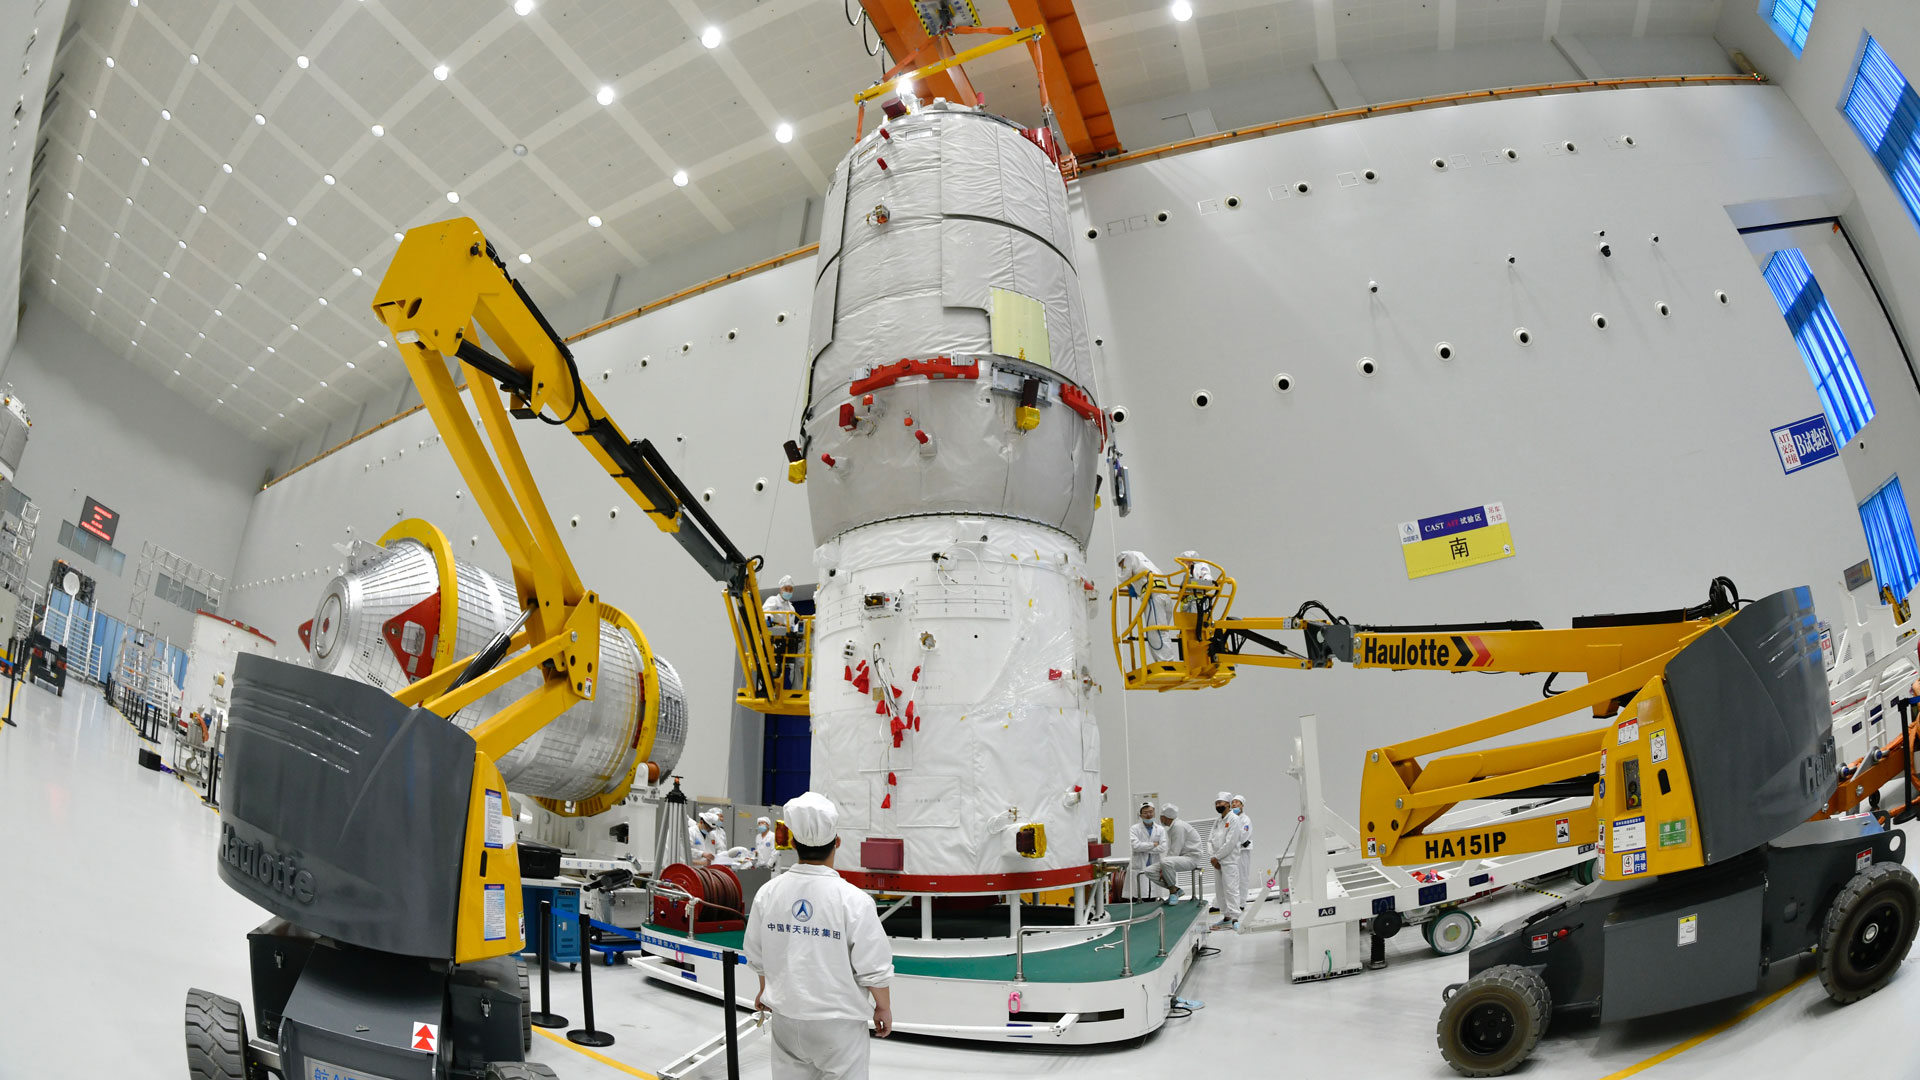 The Tianzhou-6 cargo ship in the assembly building. /China Academy of Space Technology